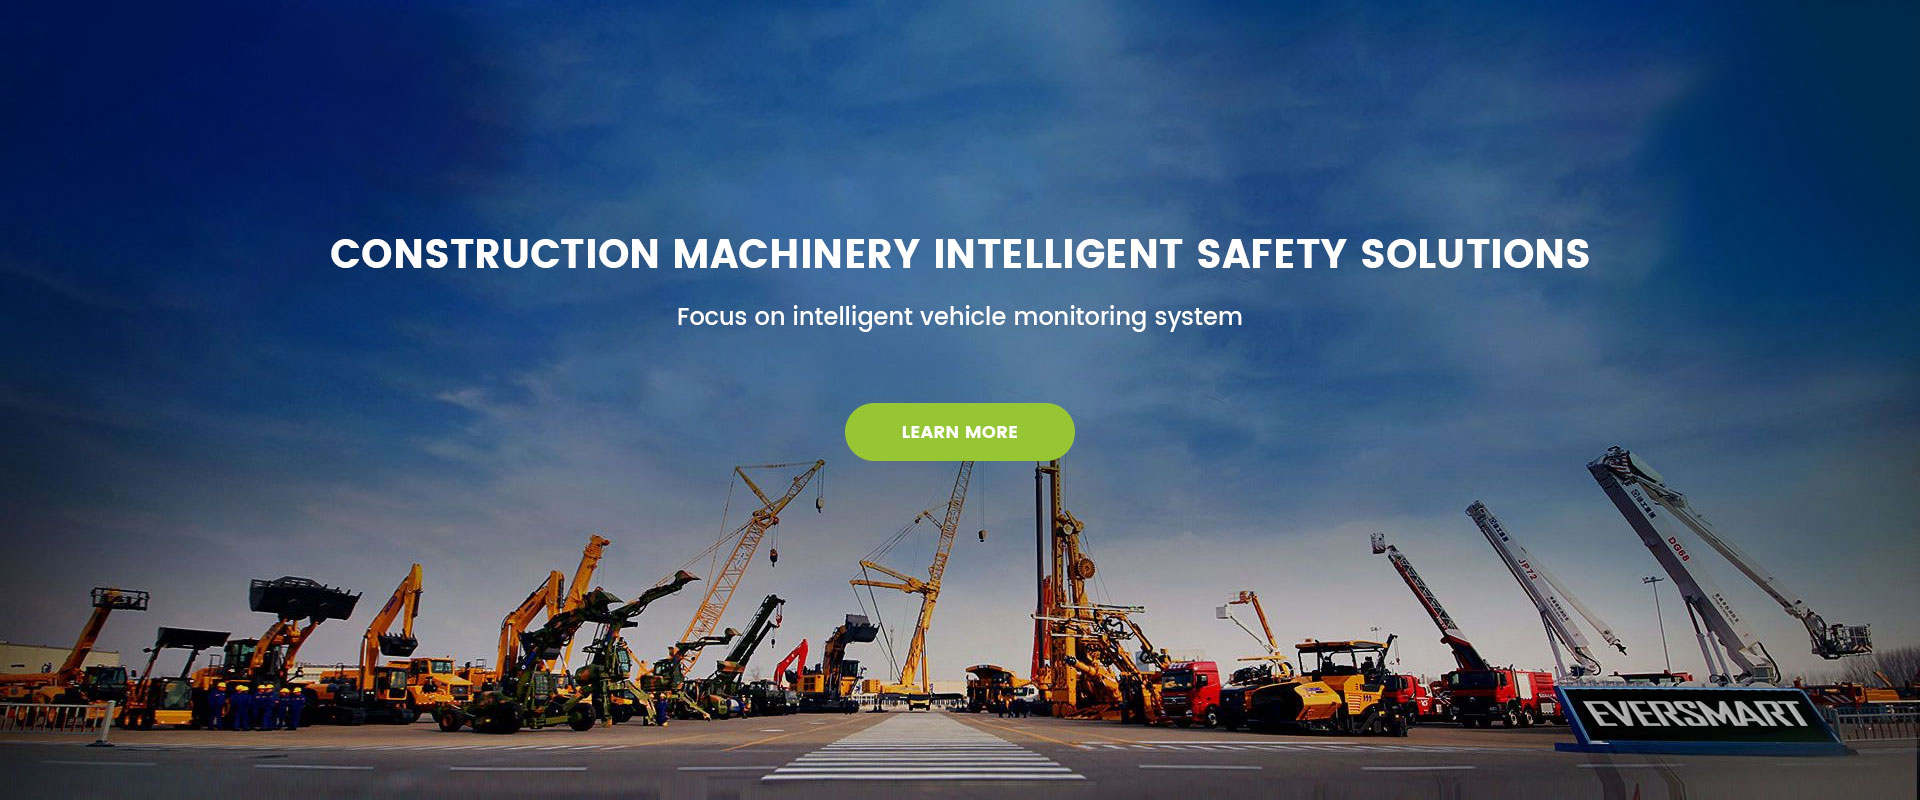 CONSTRUCTION MACHINERY INTELLIGENT SAFETY SOLUTIONS